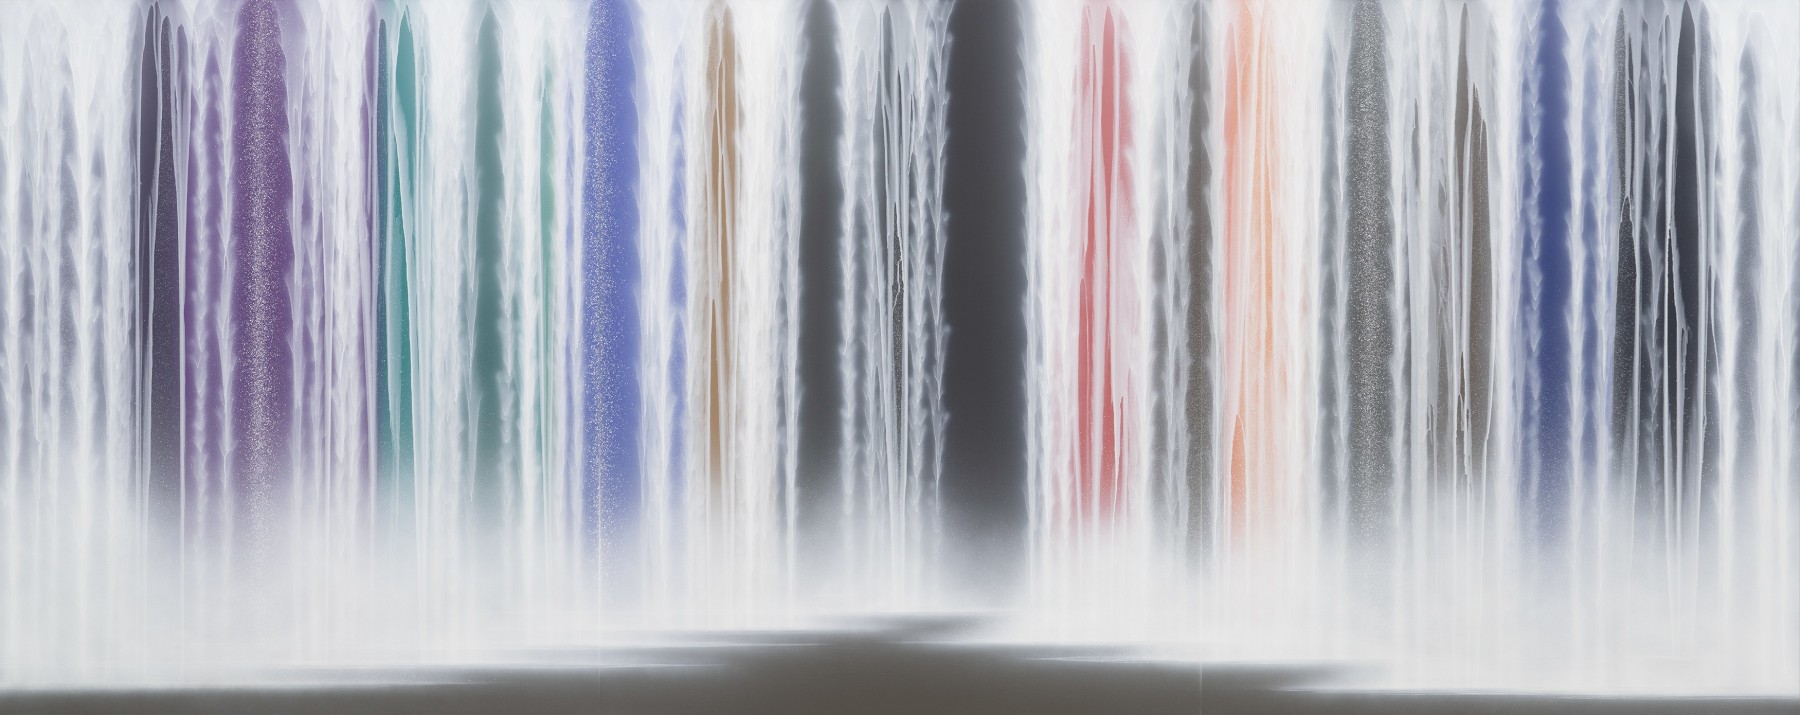 Waterfall on Colors
2023, 194 x 486 cm

Link to Sundaram Tagore Gallery